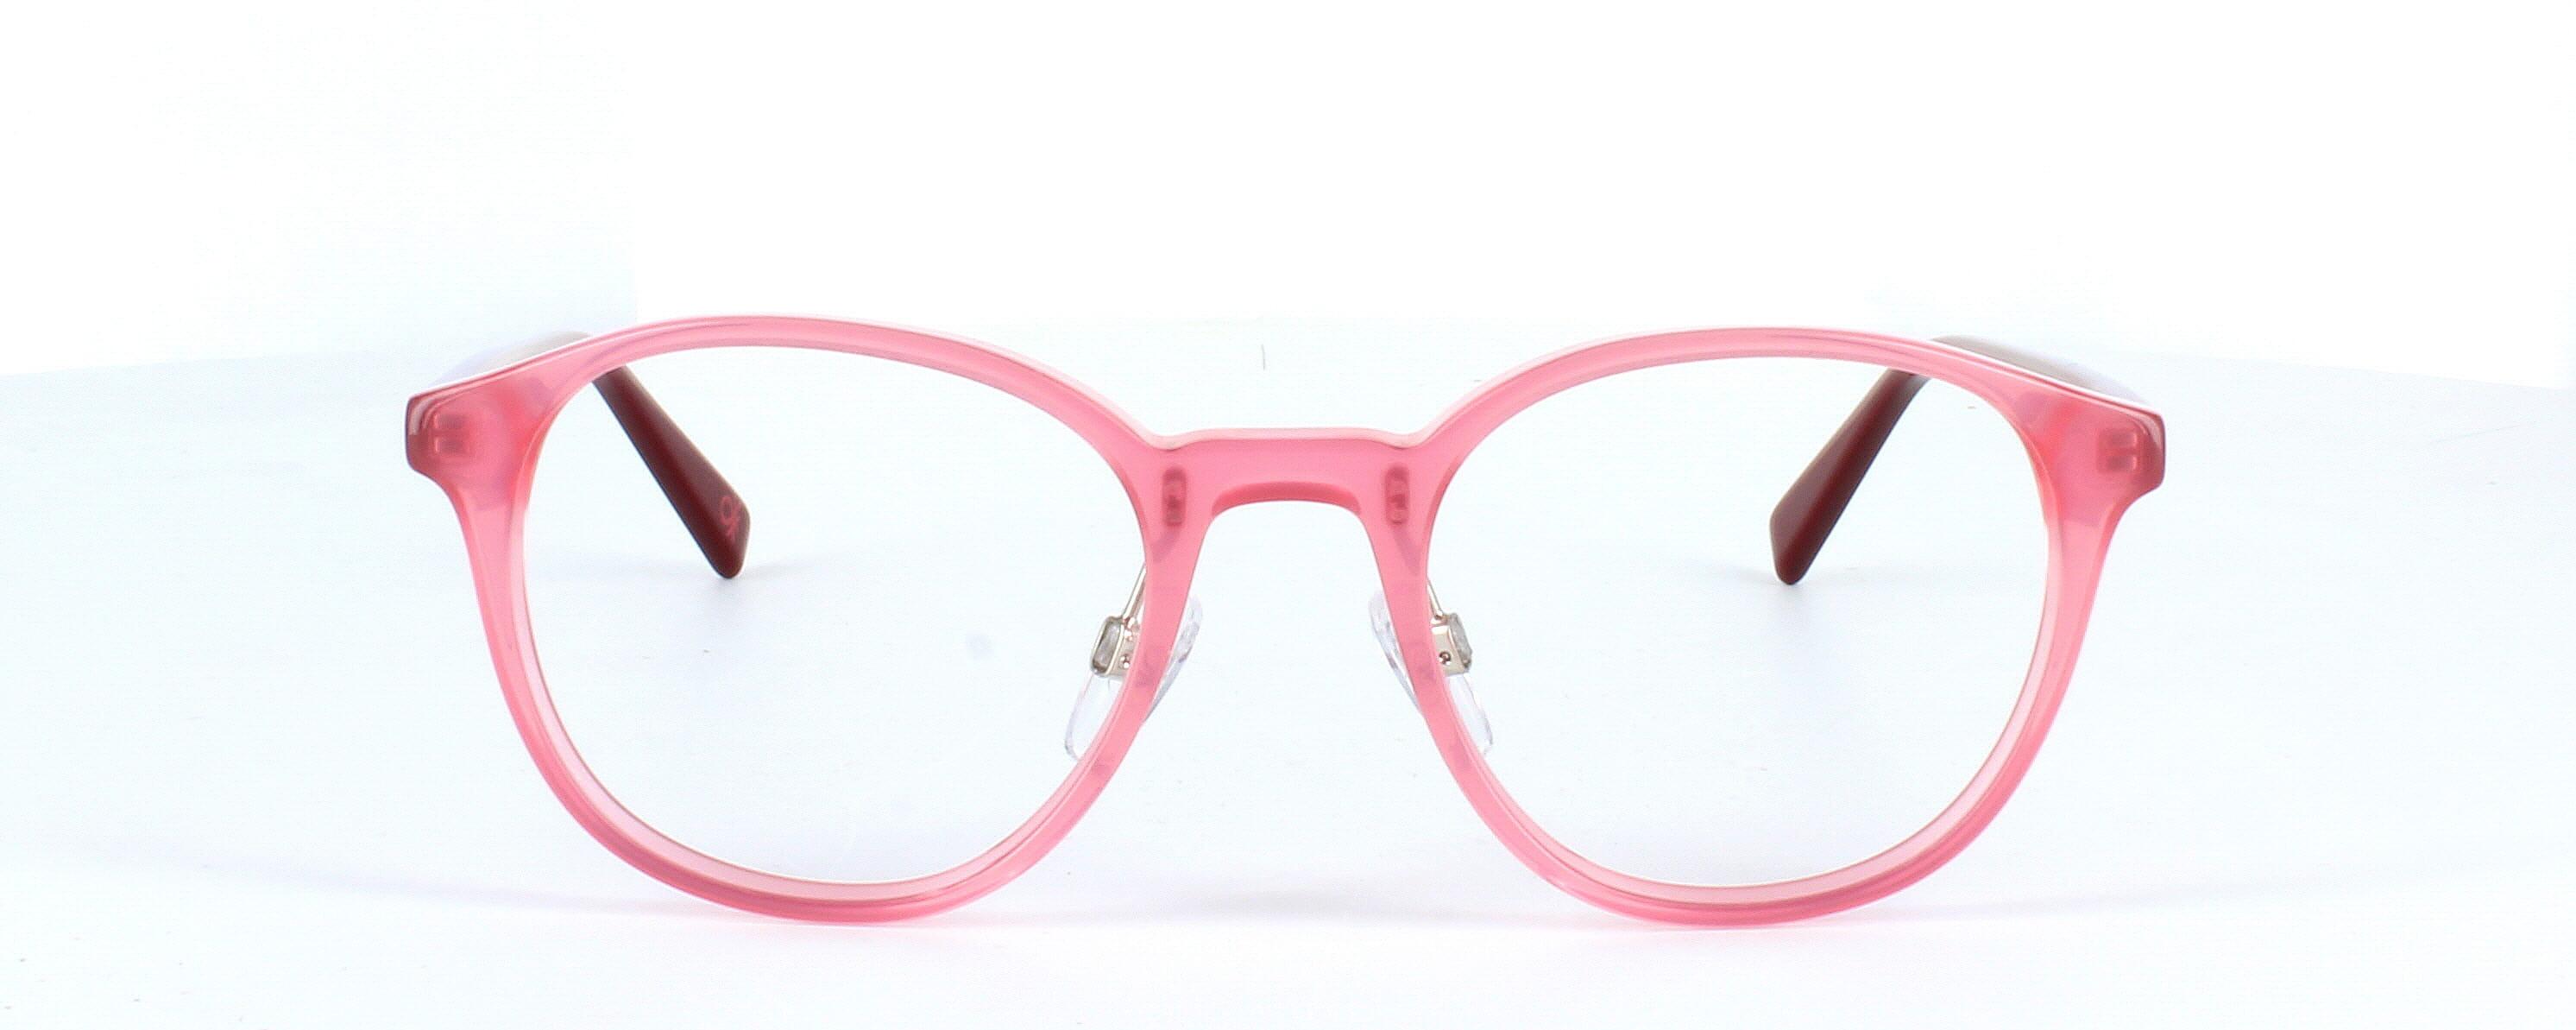 Benetton BEO1007 283 - Women's round plastic crystal pink glasses frame with sprung hinged burgundy arms - image view 2